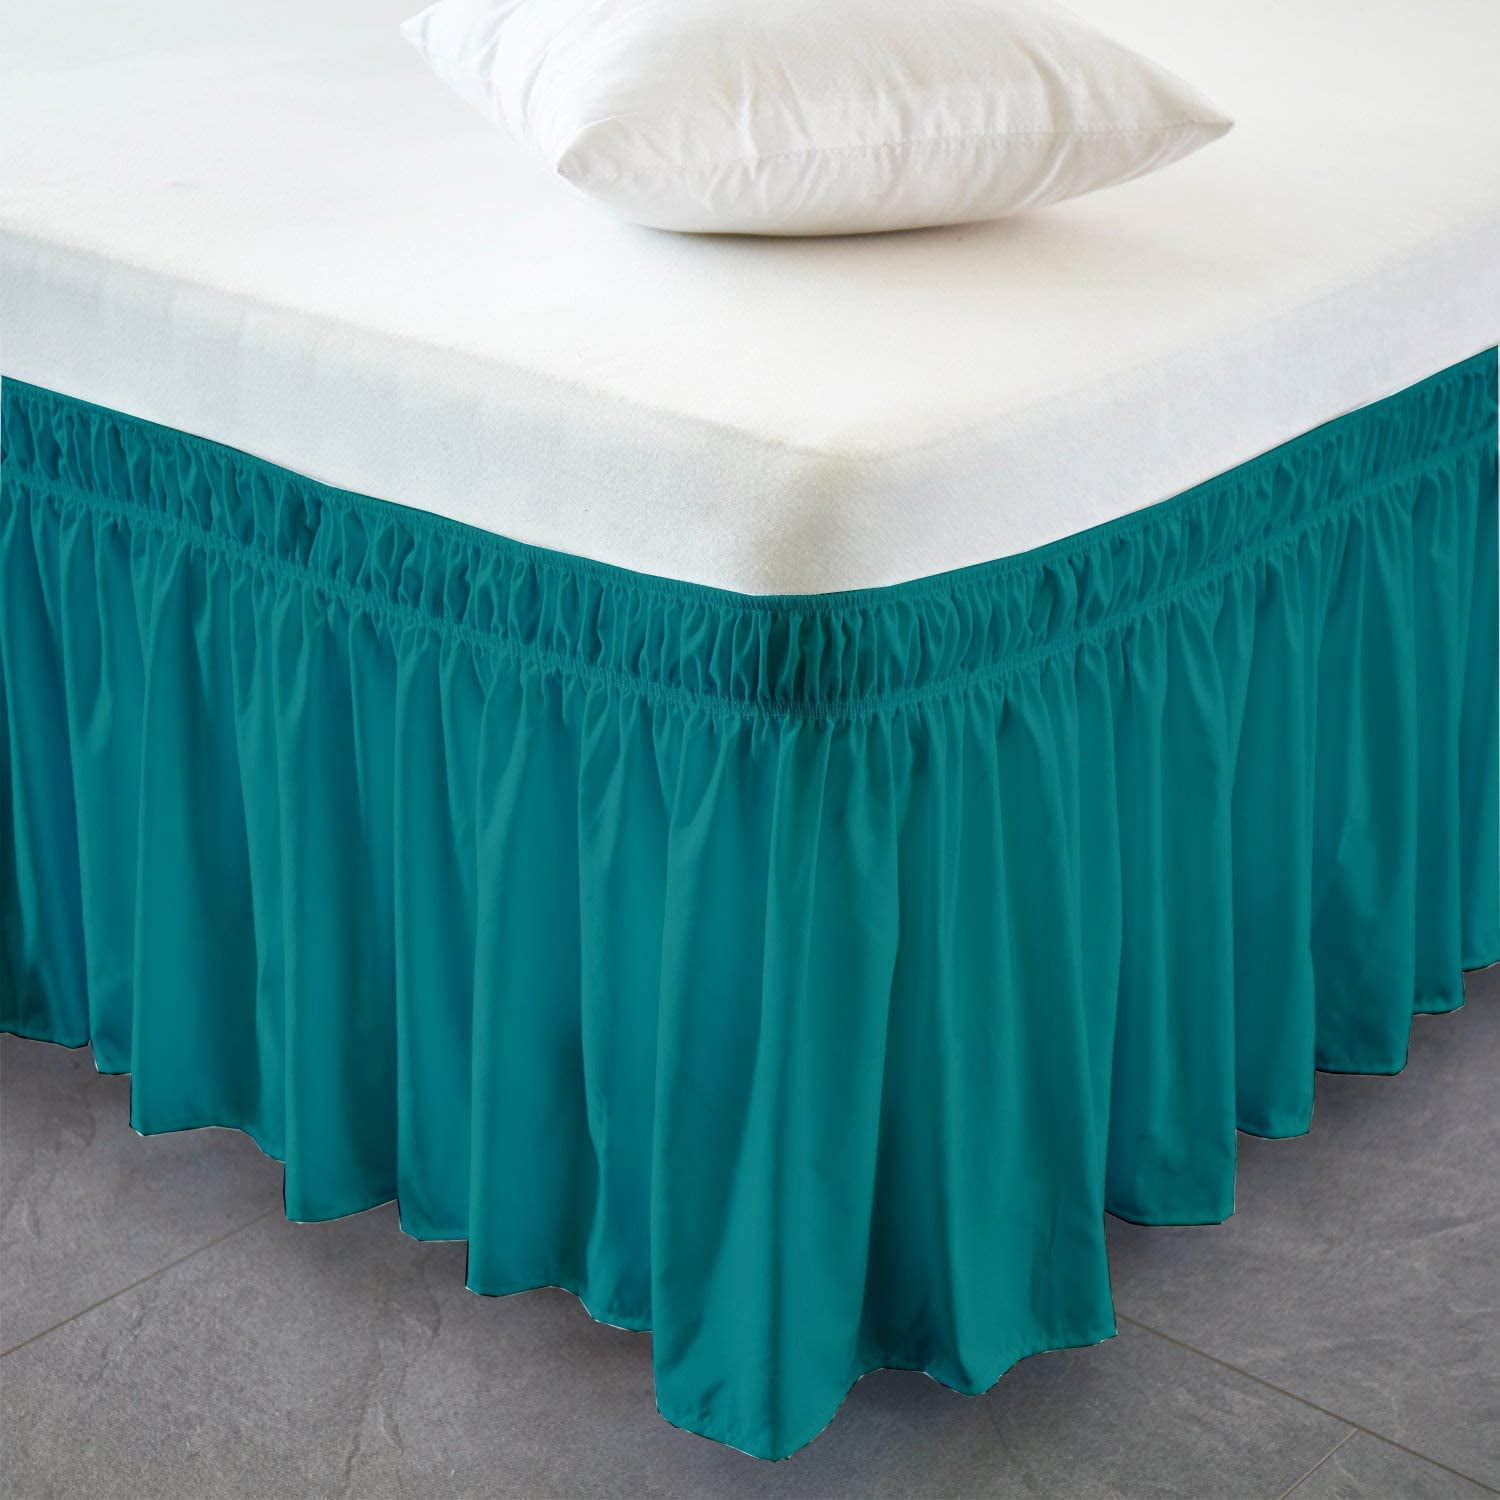 Wrap Around Bed Skirt Elastic Ruffle Three Fabric Sides Multi Color Size Drop 